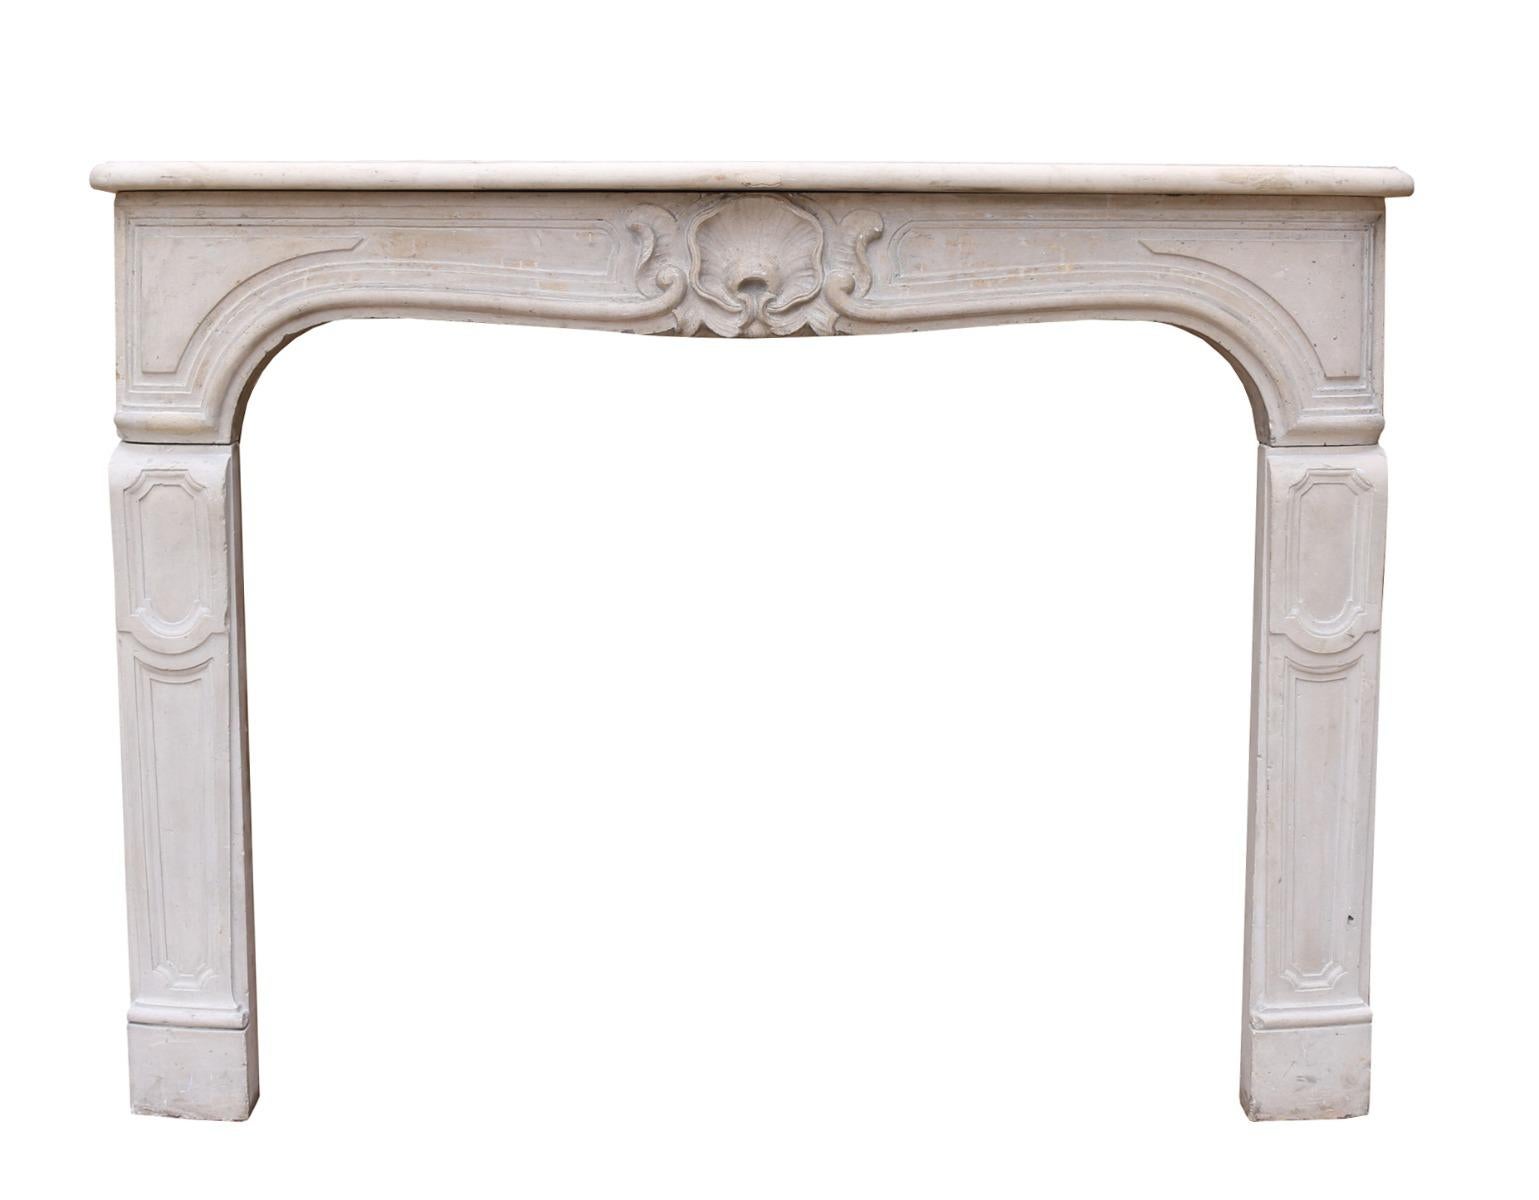 This Limestone fire surround has a serpentine shaped shelf and panel frieze with central shell decoration, scrolled panels and panelled jamb supports.

Additional Dimensions

Opening Height 88.5 cm

Opening Width 113.5 cm

Width between